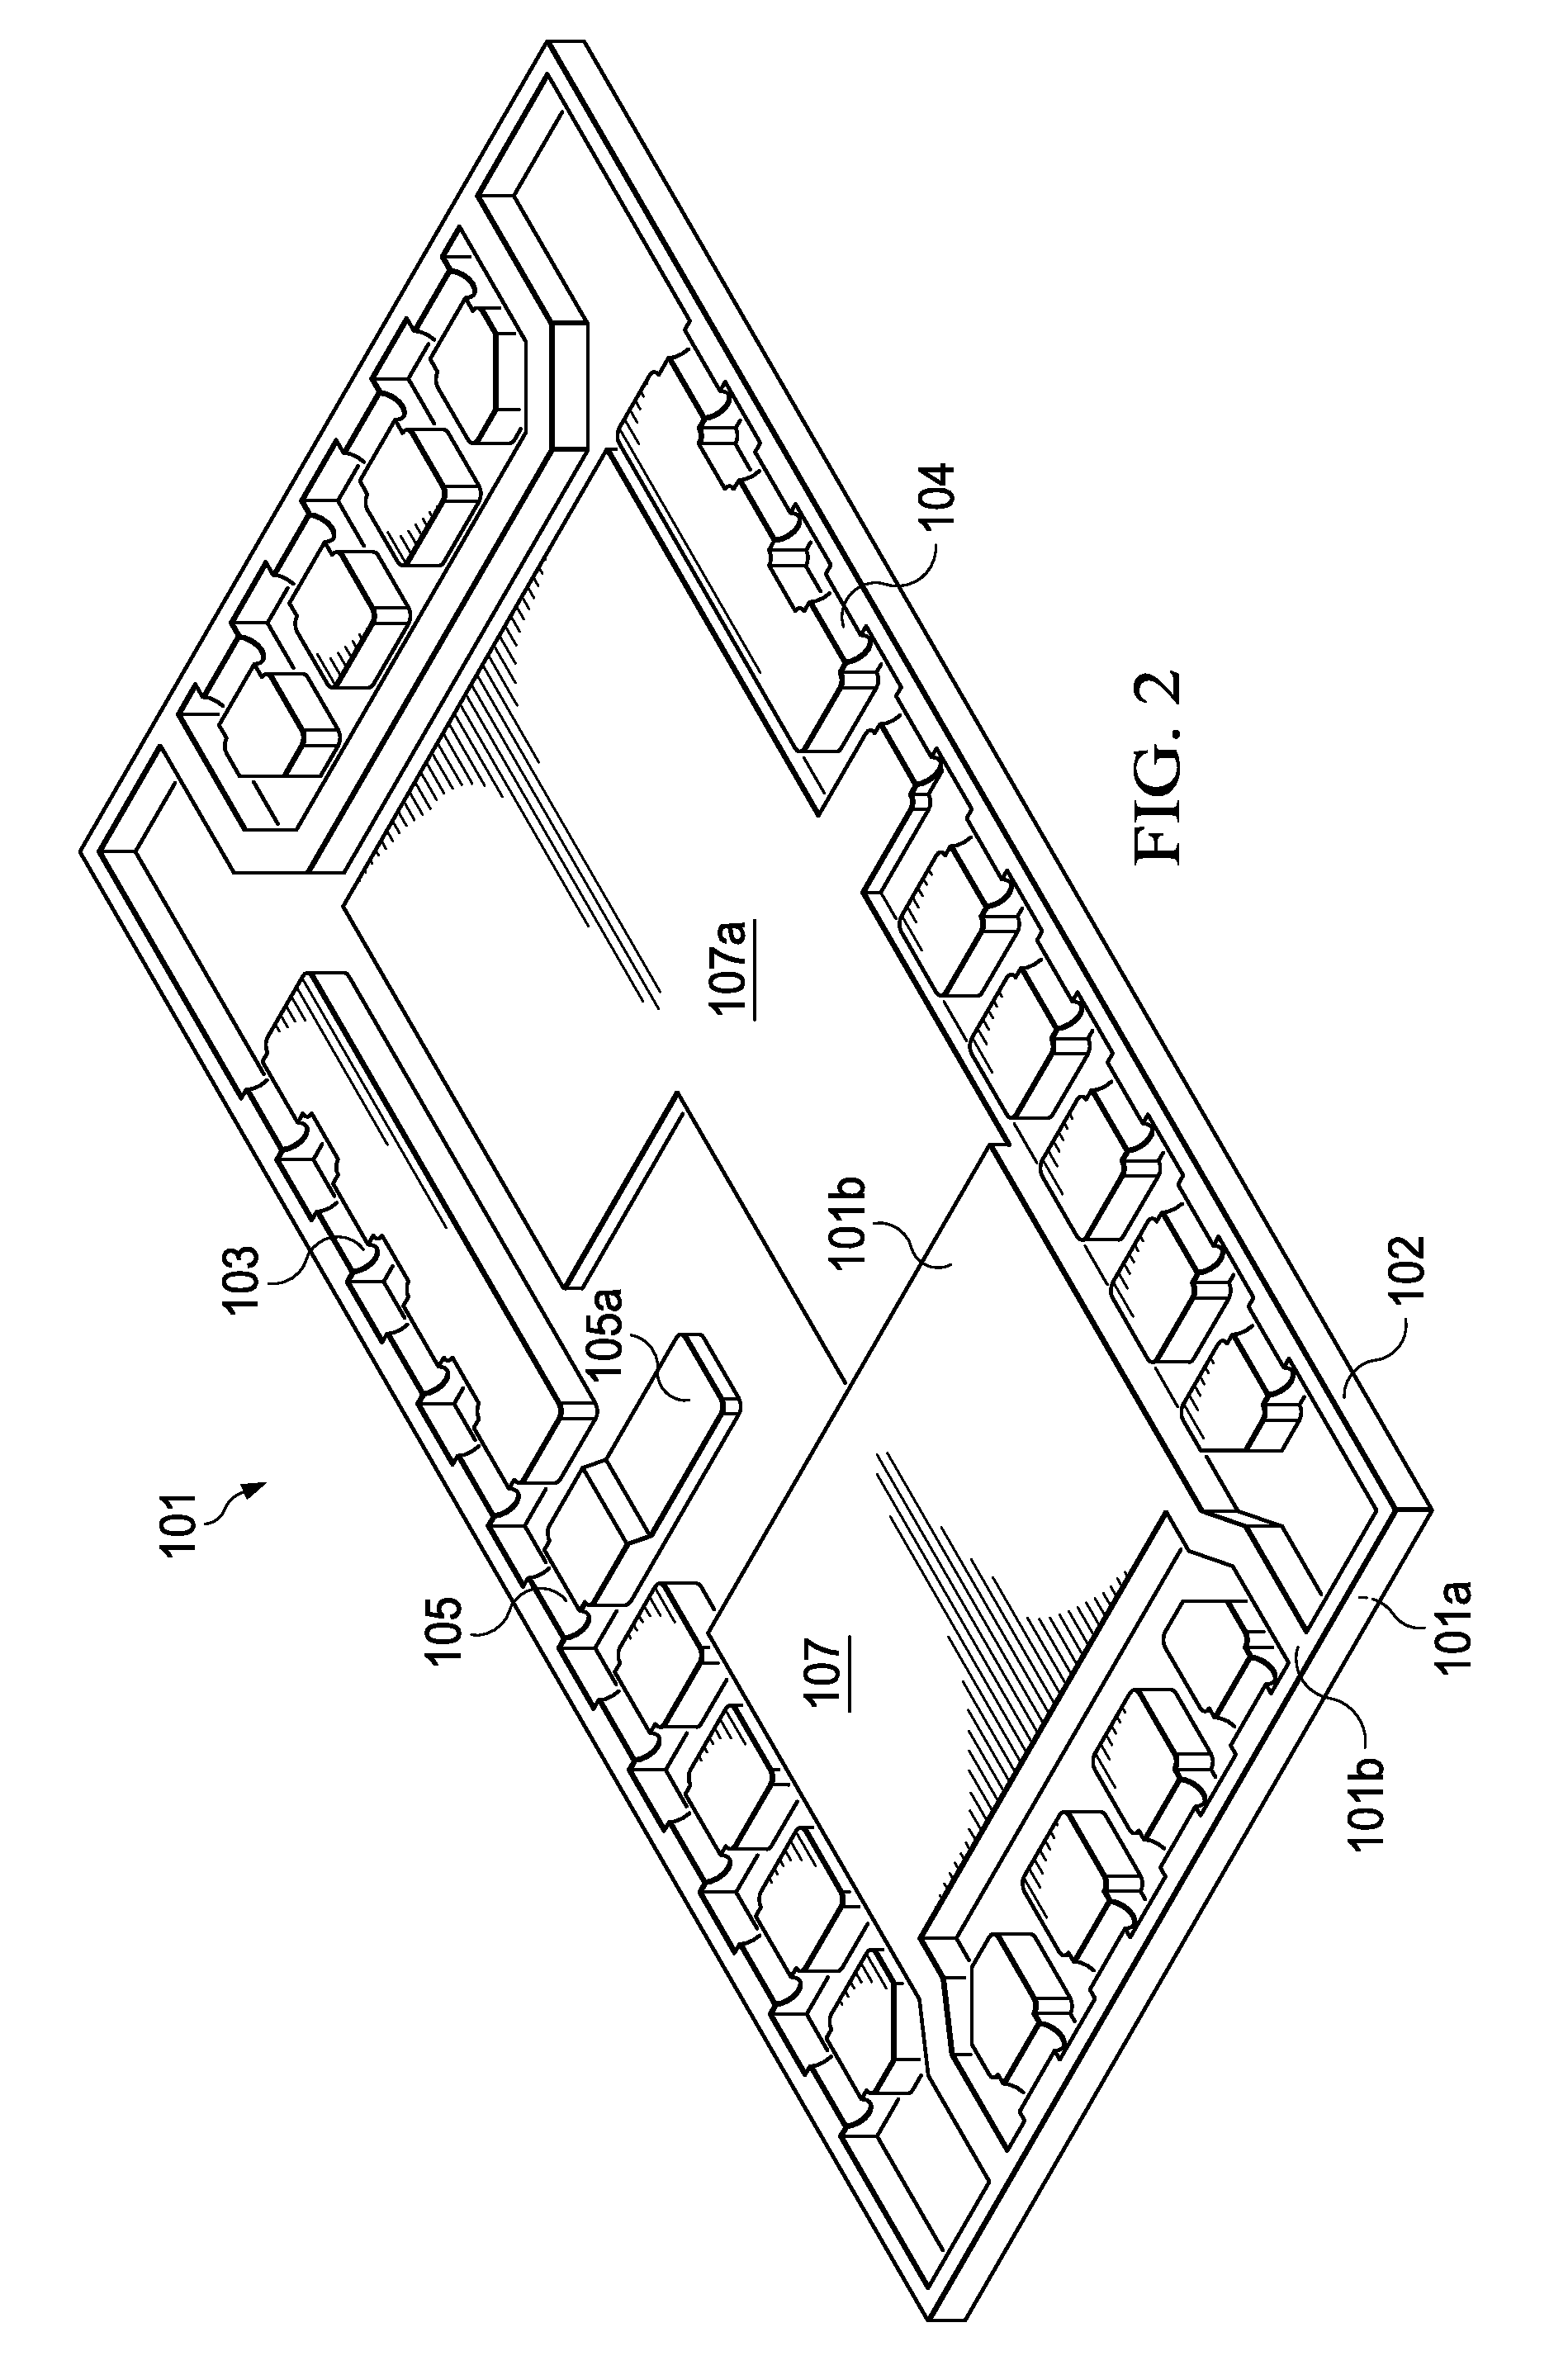 Converter having partially thinned leadframe with stacked chips and interposer, free of wires and clips